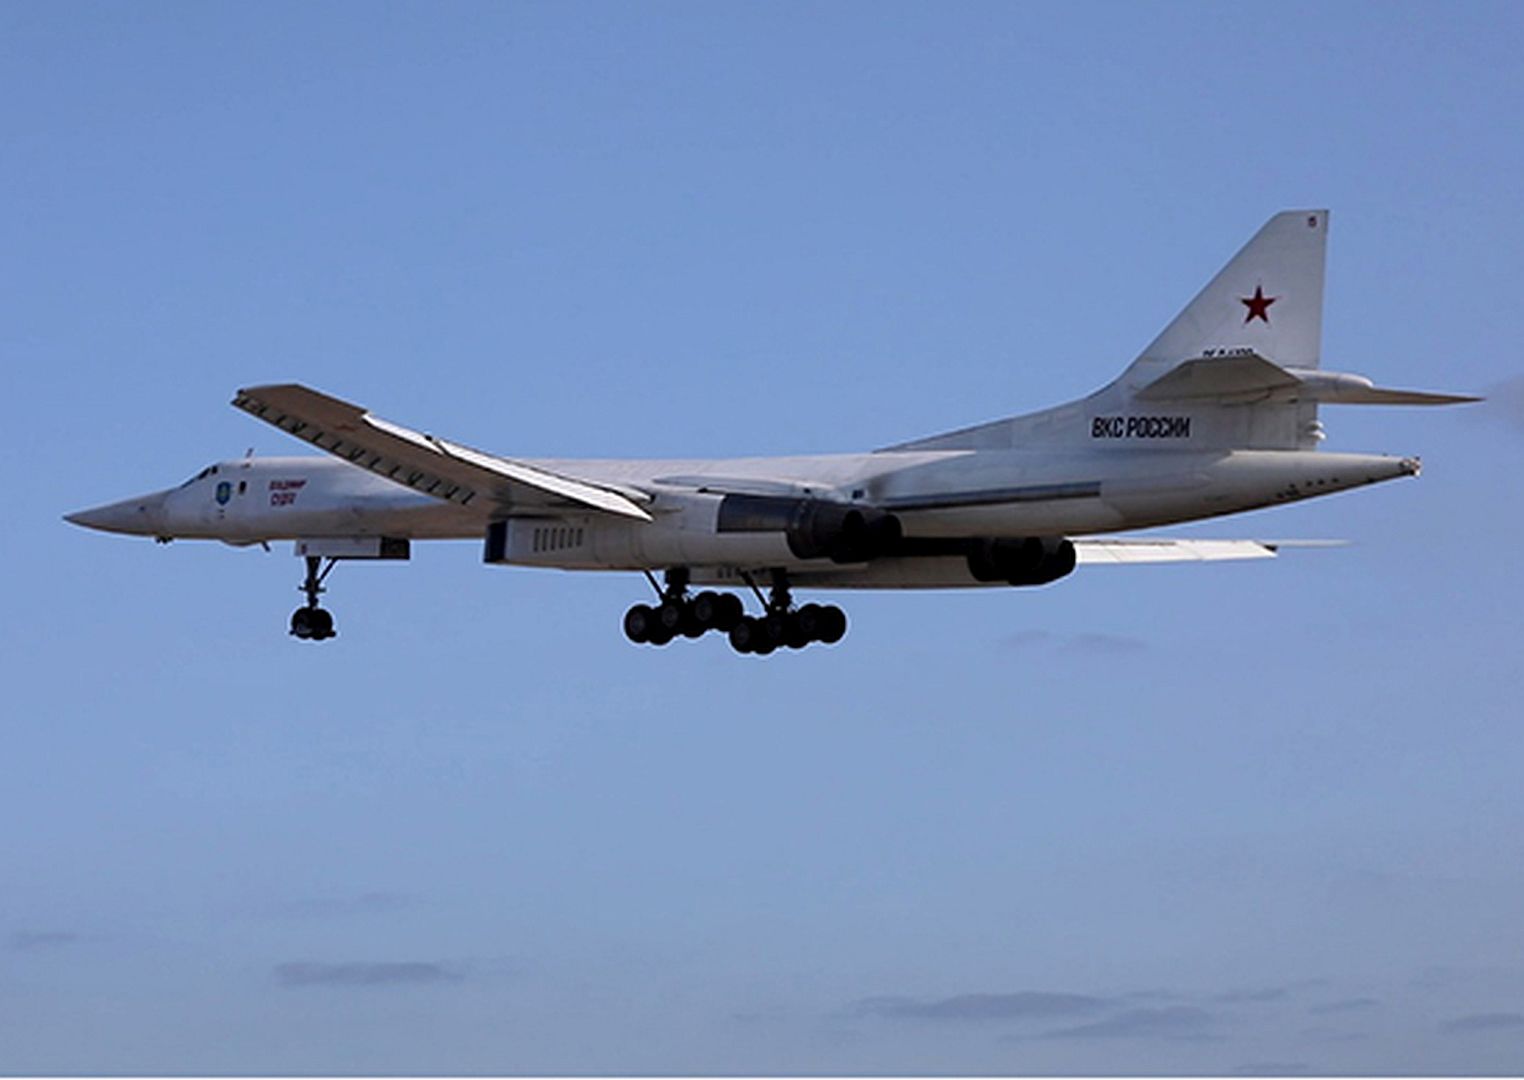 Tu 160 And Il 78 Long Range Aircraft Have Completed Long Flights With Air To Air Refuelling 1